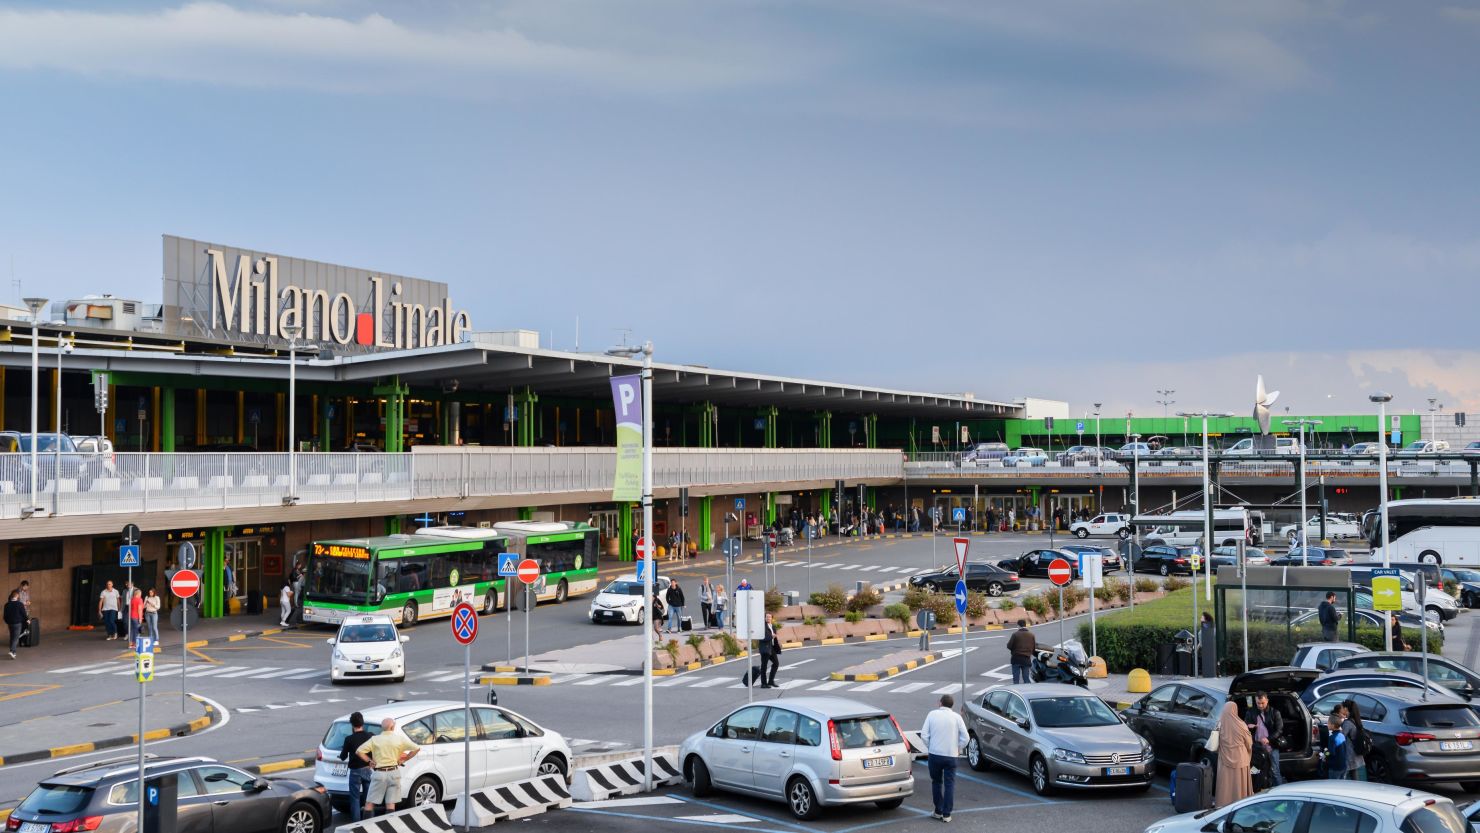 Milan's Linate airport is closed until Oct. 26, but alternate transit options abound.